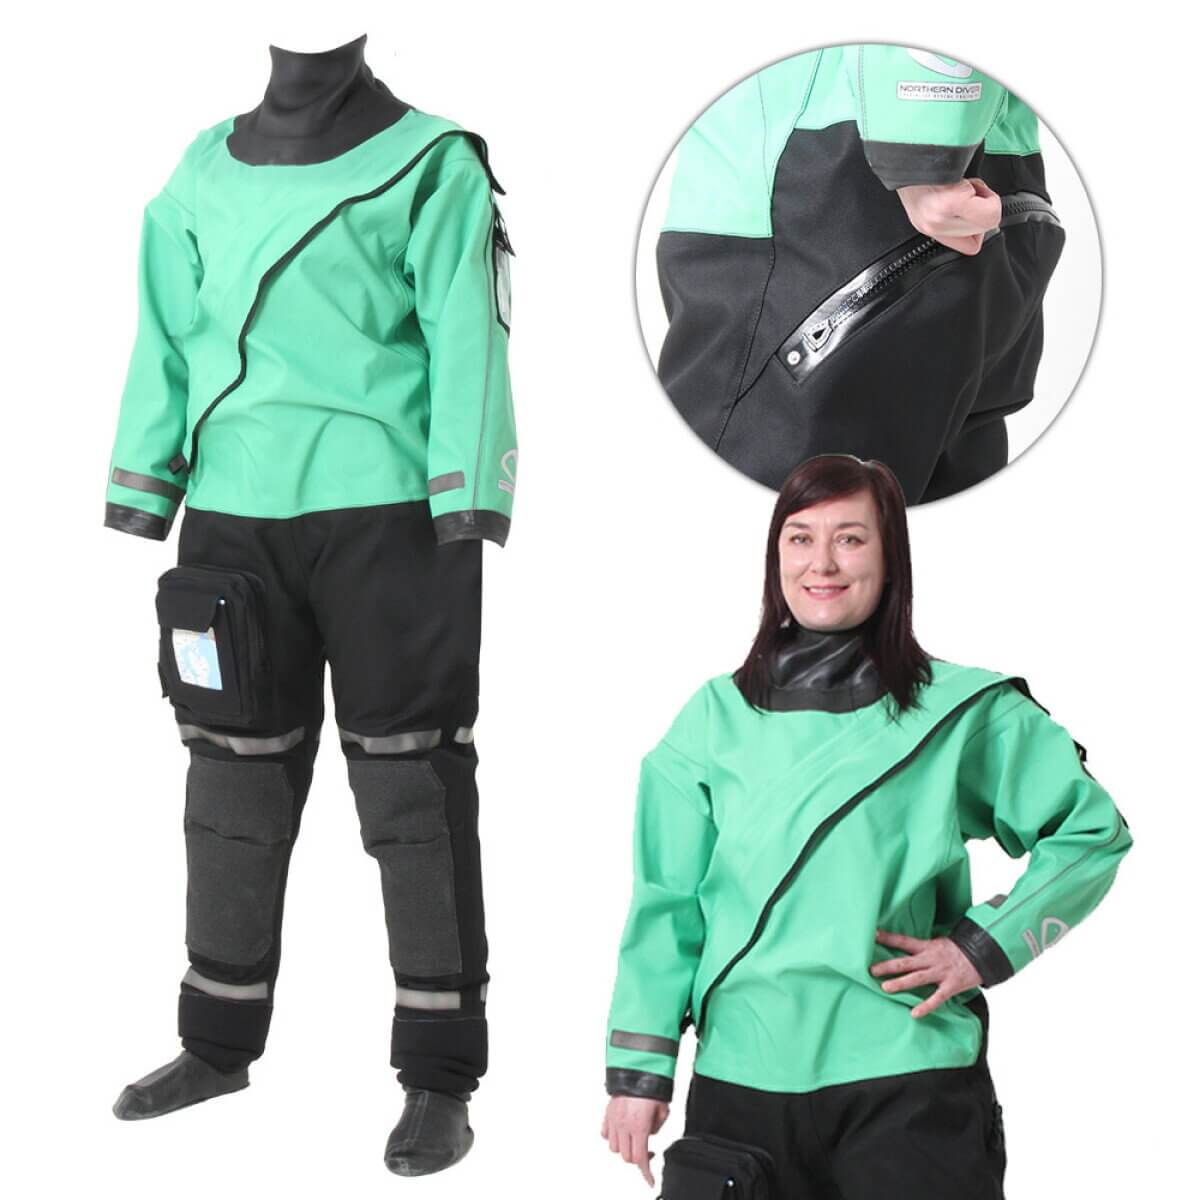 Northern Diver FEM Women’s Made To Measure Rescue Suit